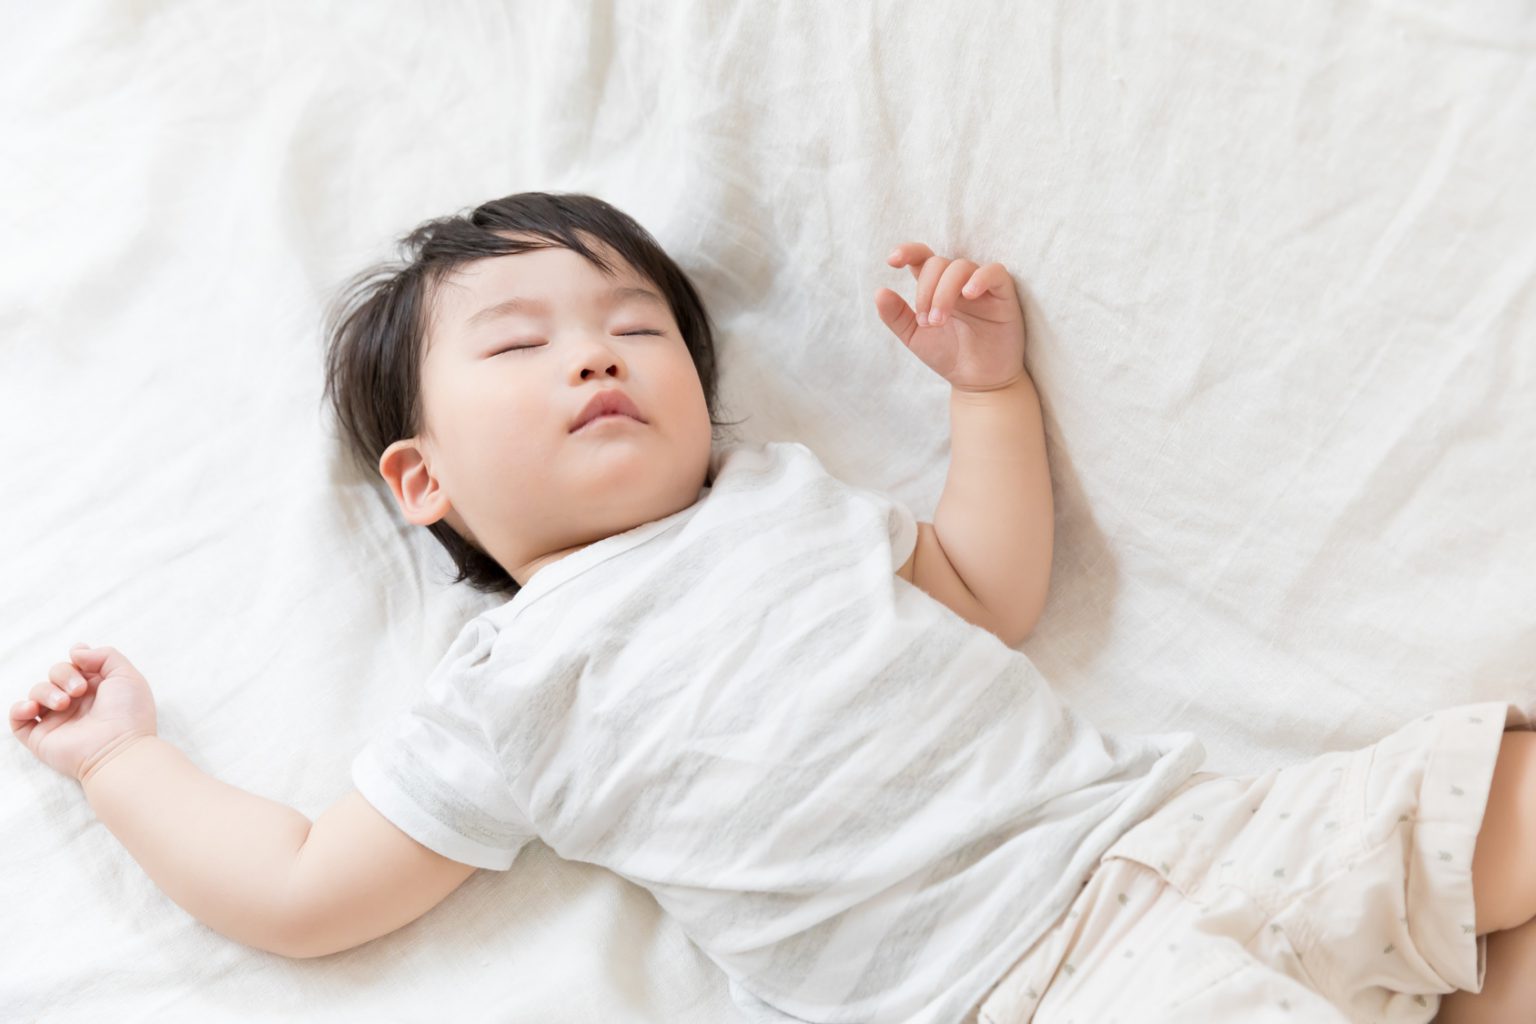 Top 5 Most Common Sleep Issues in Toddler Years